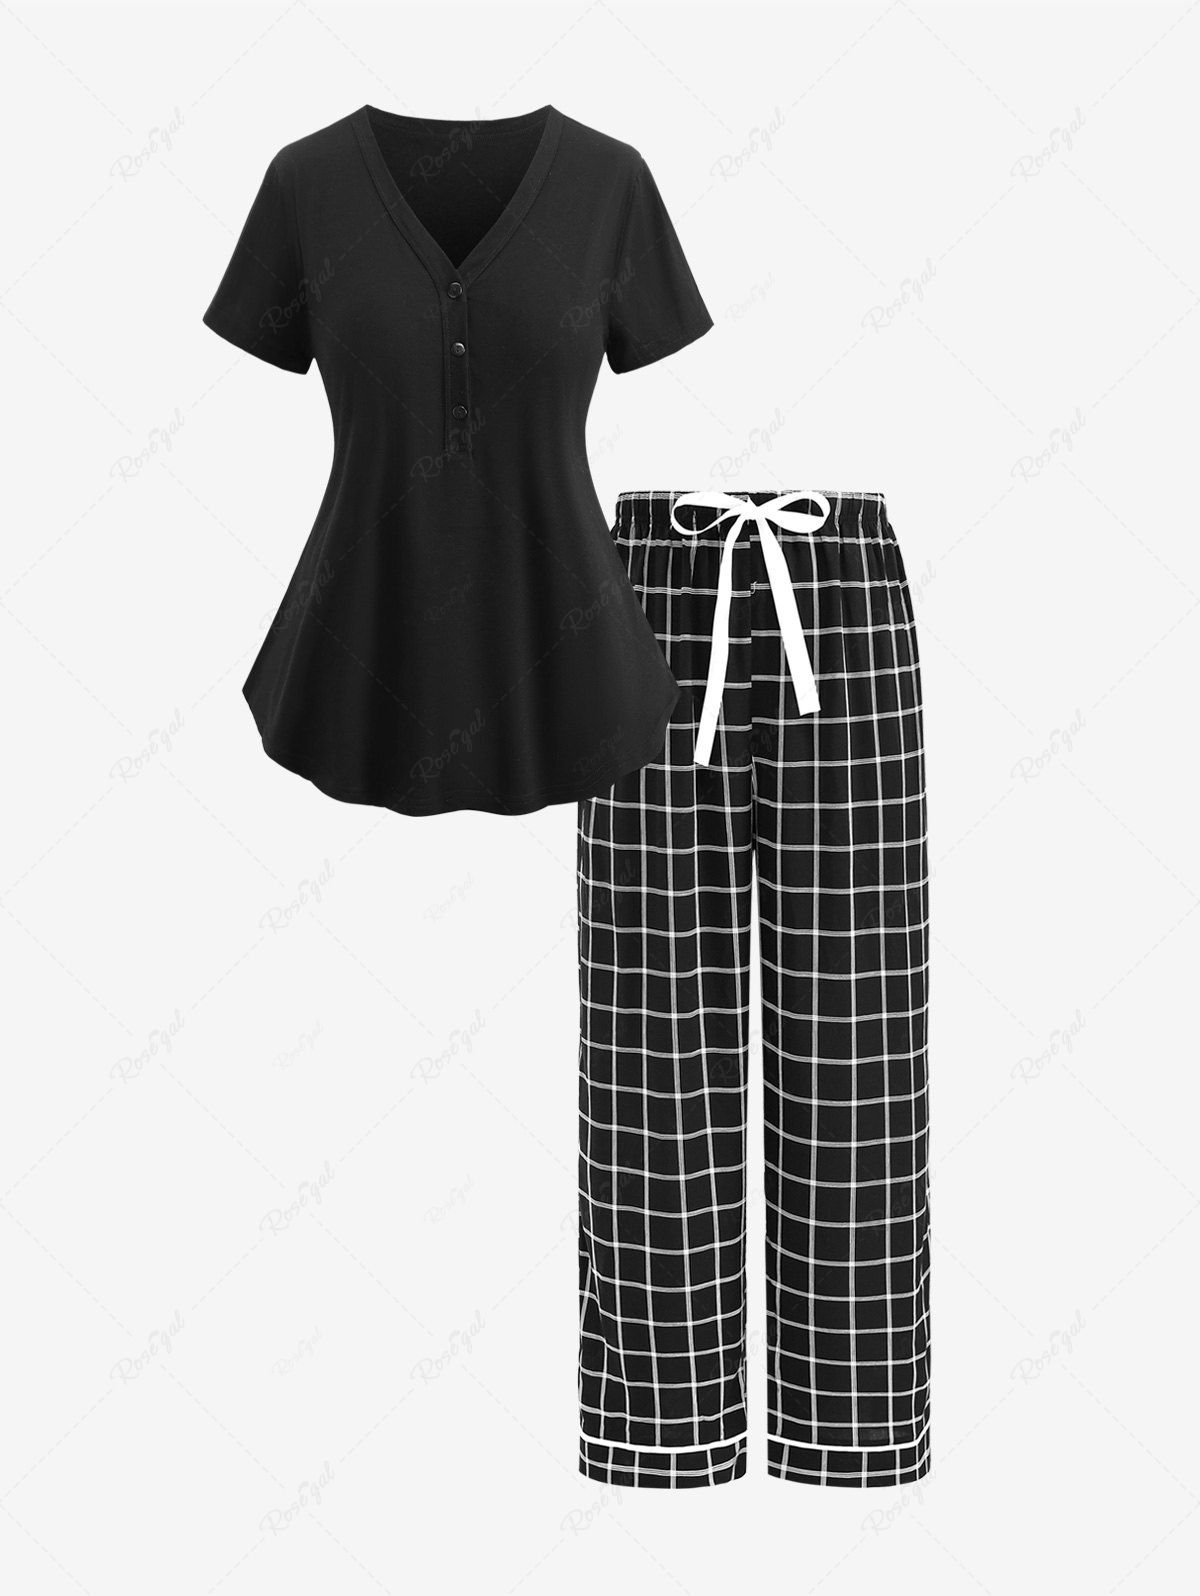 Outfit Plus Size Buttons Surplice Top and Plaid Bowknot Tied Pants Pajama Set  